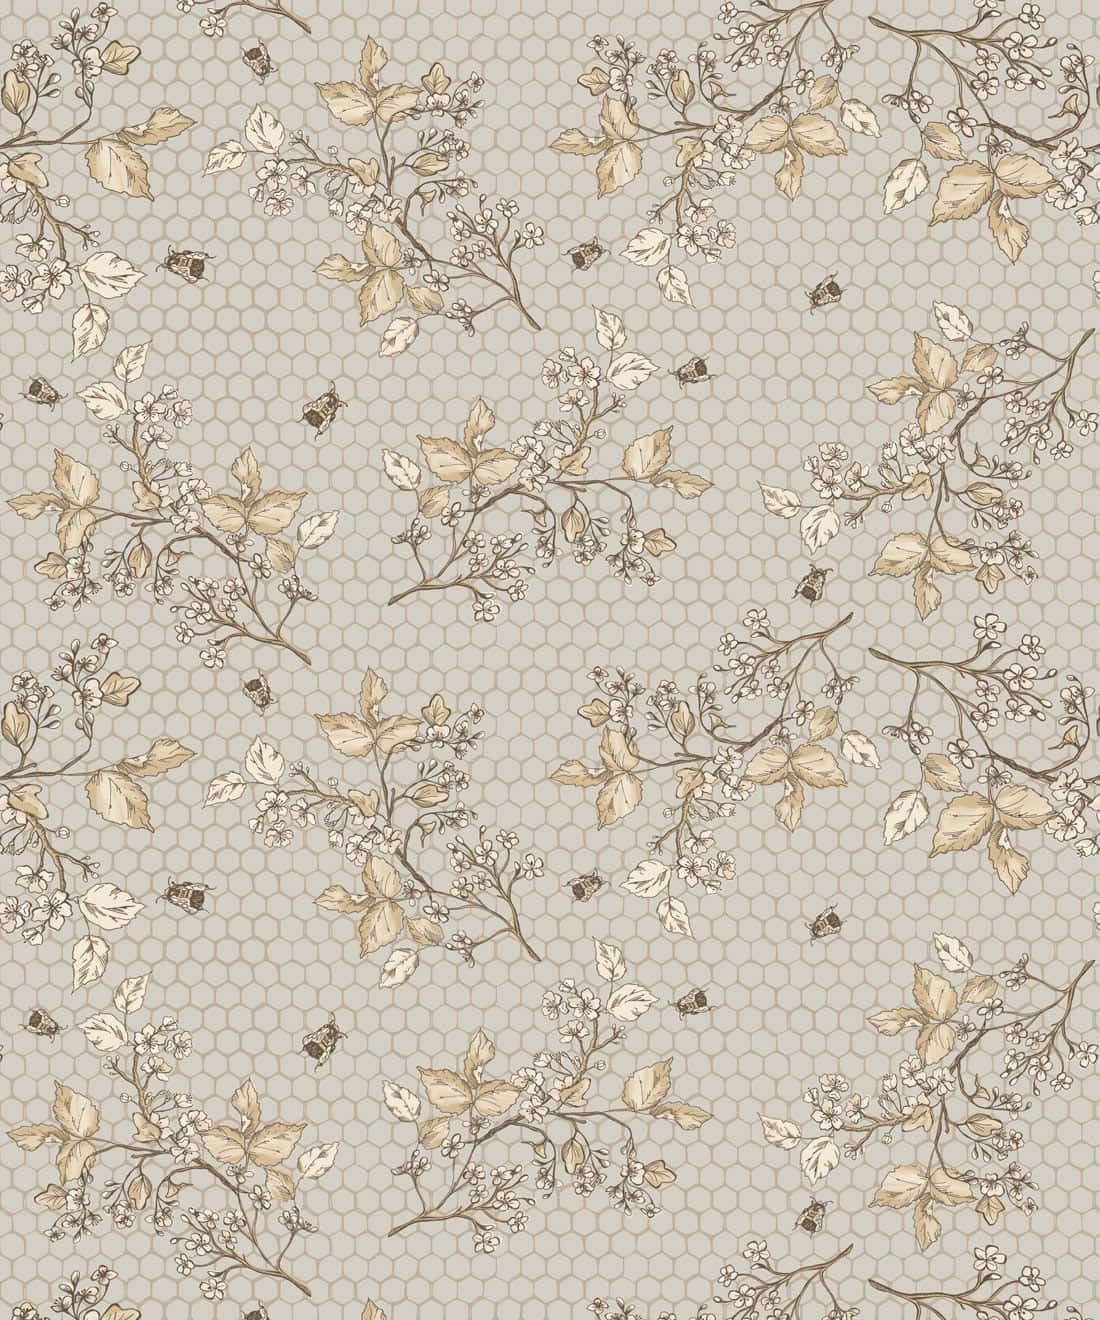 A classic illustration of a Vintage Bee Wallpaper